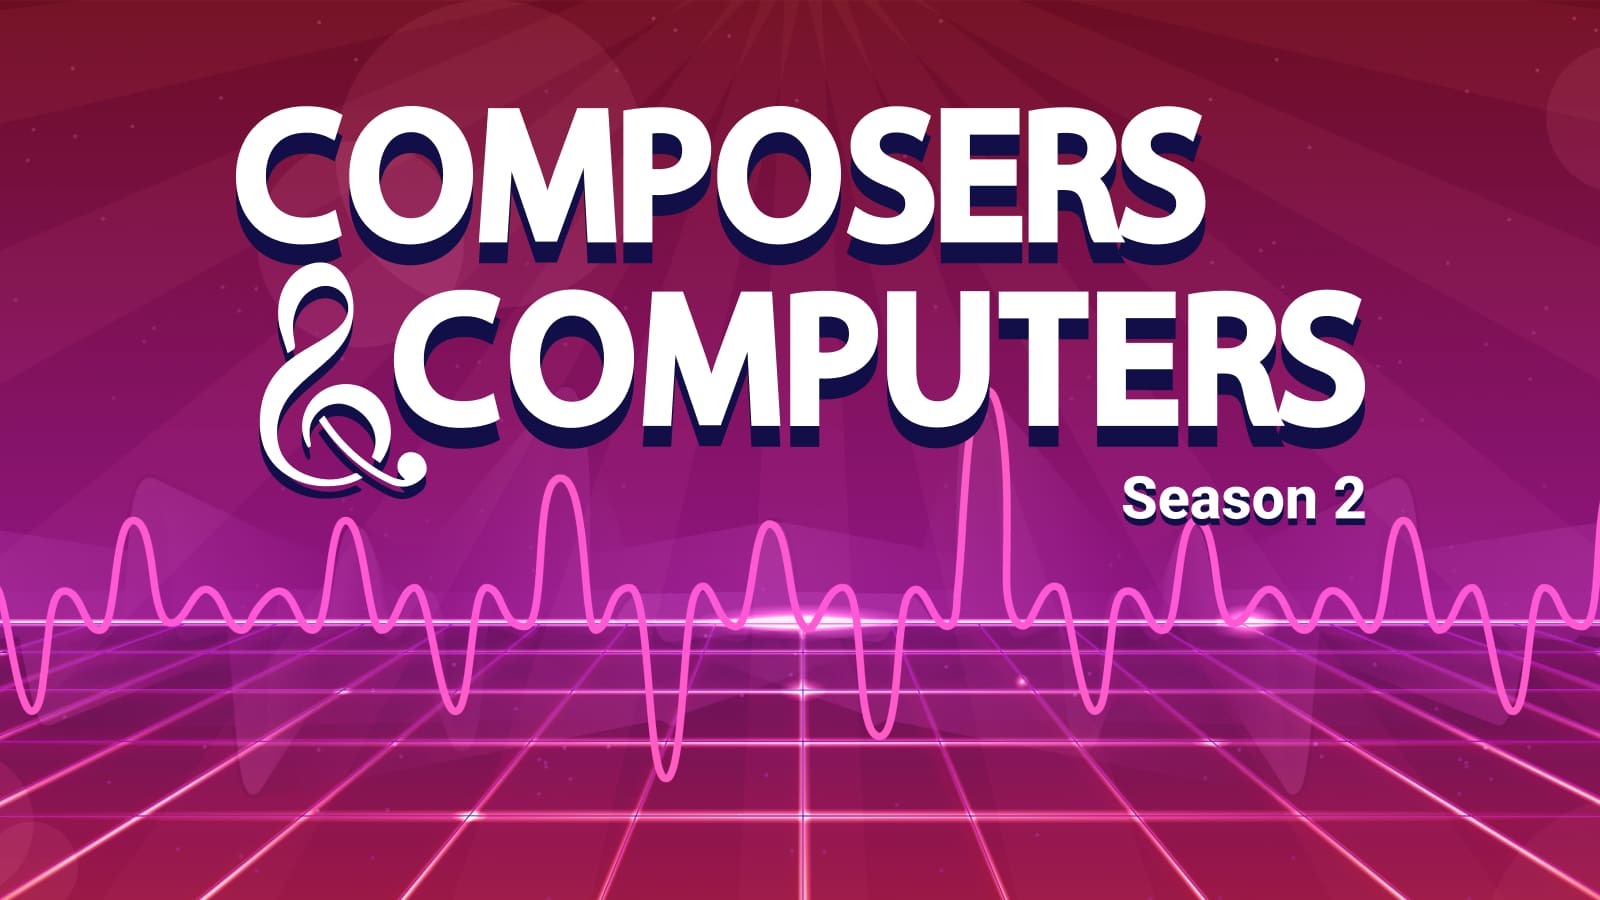 Composers & Computers Season 2. The ampersand is a treble clef. There is a sonic wave underneath the words.